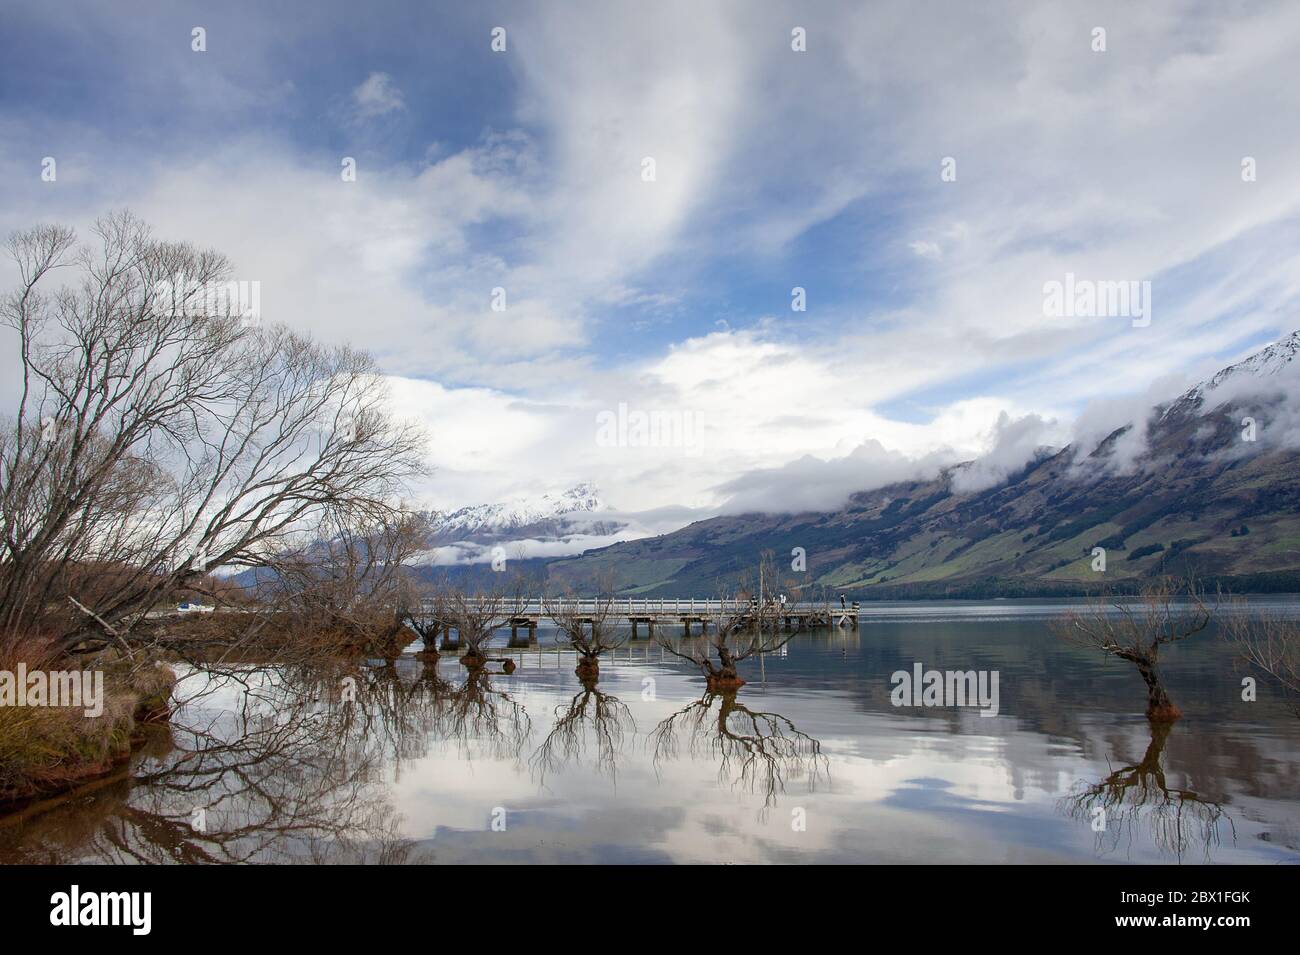 The Willows of Lake Wakatipu and Glenorchy Wharf, Otago, New Zealand. Magical scene in winter with cloudy sky, mountain and trees reflected in water Stock Photo